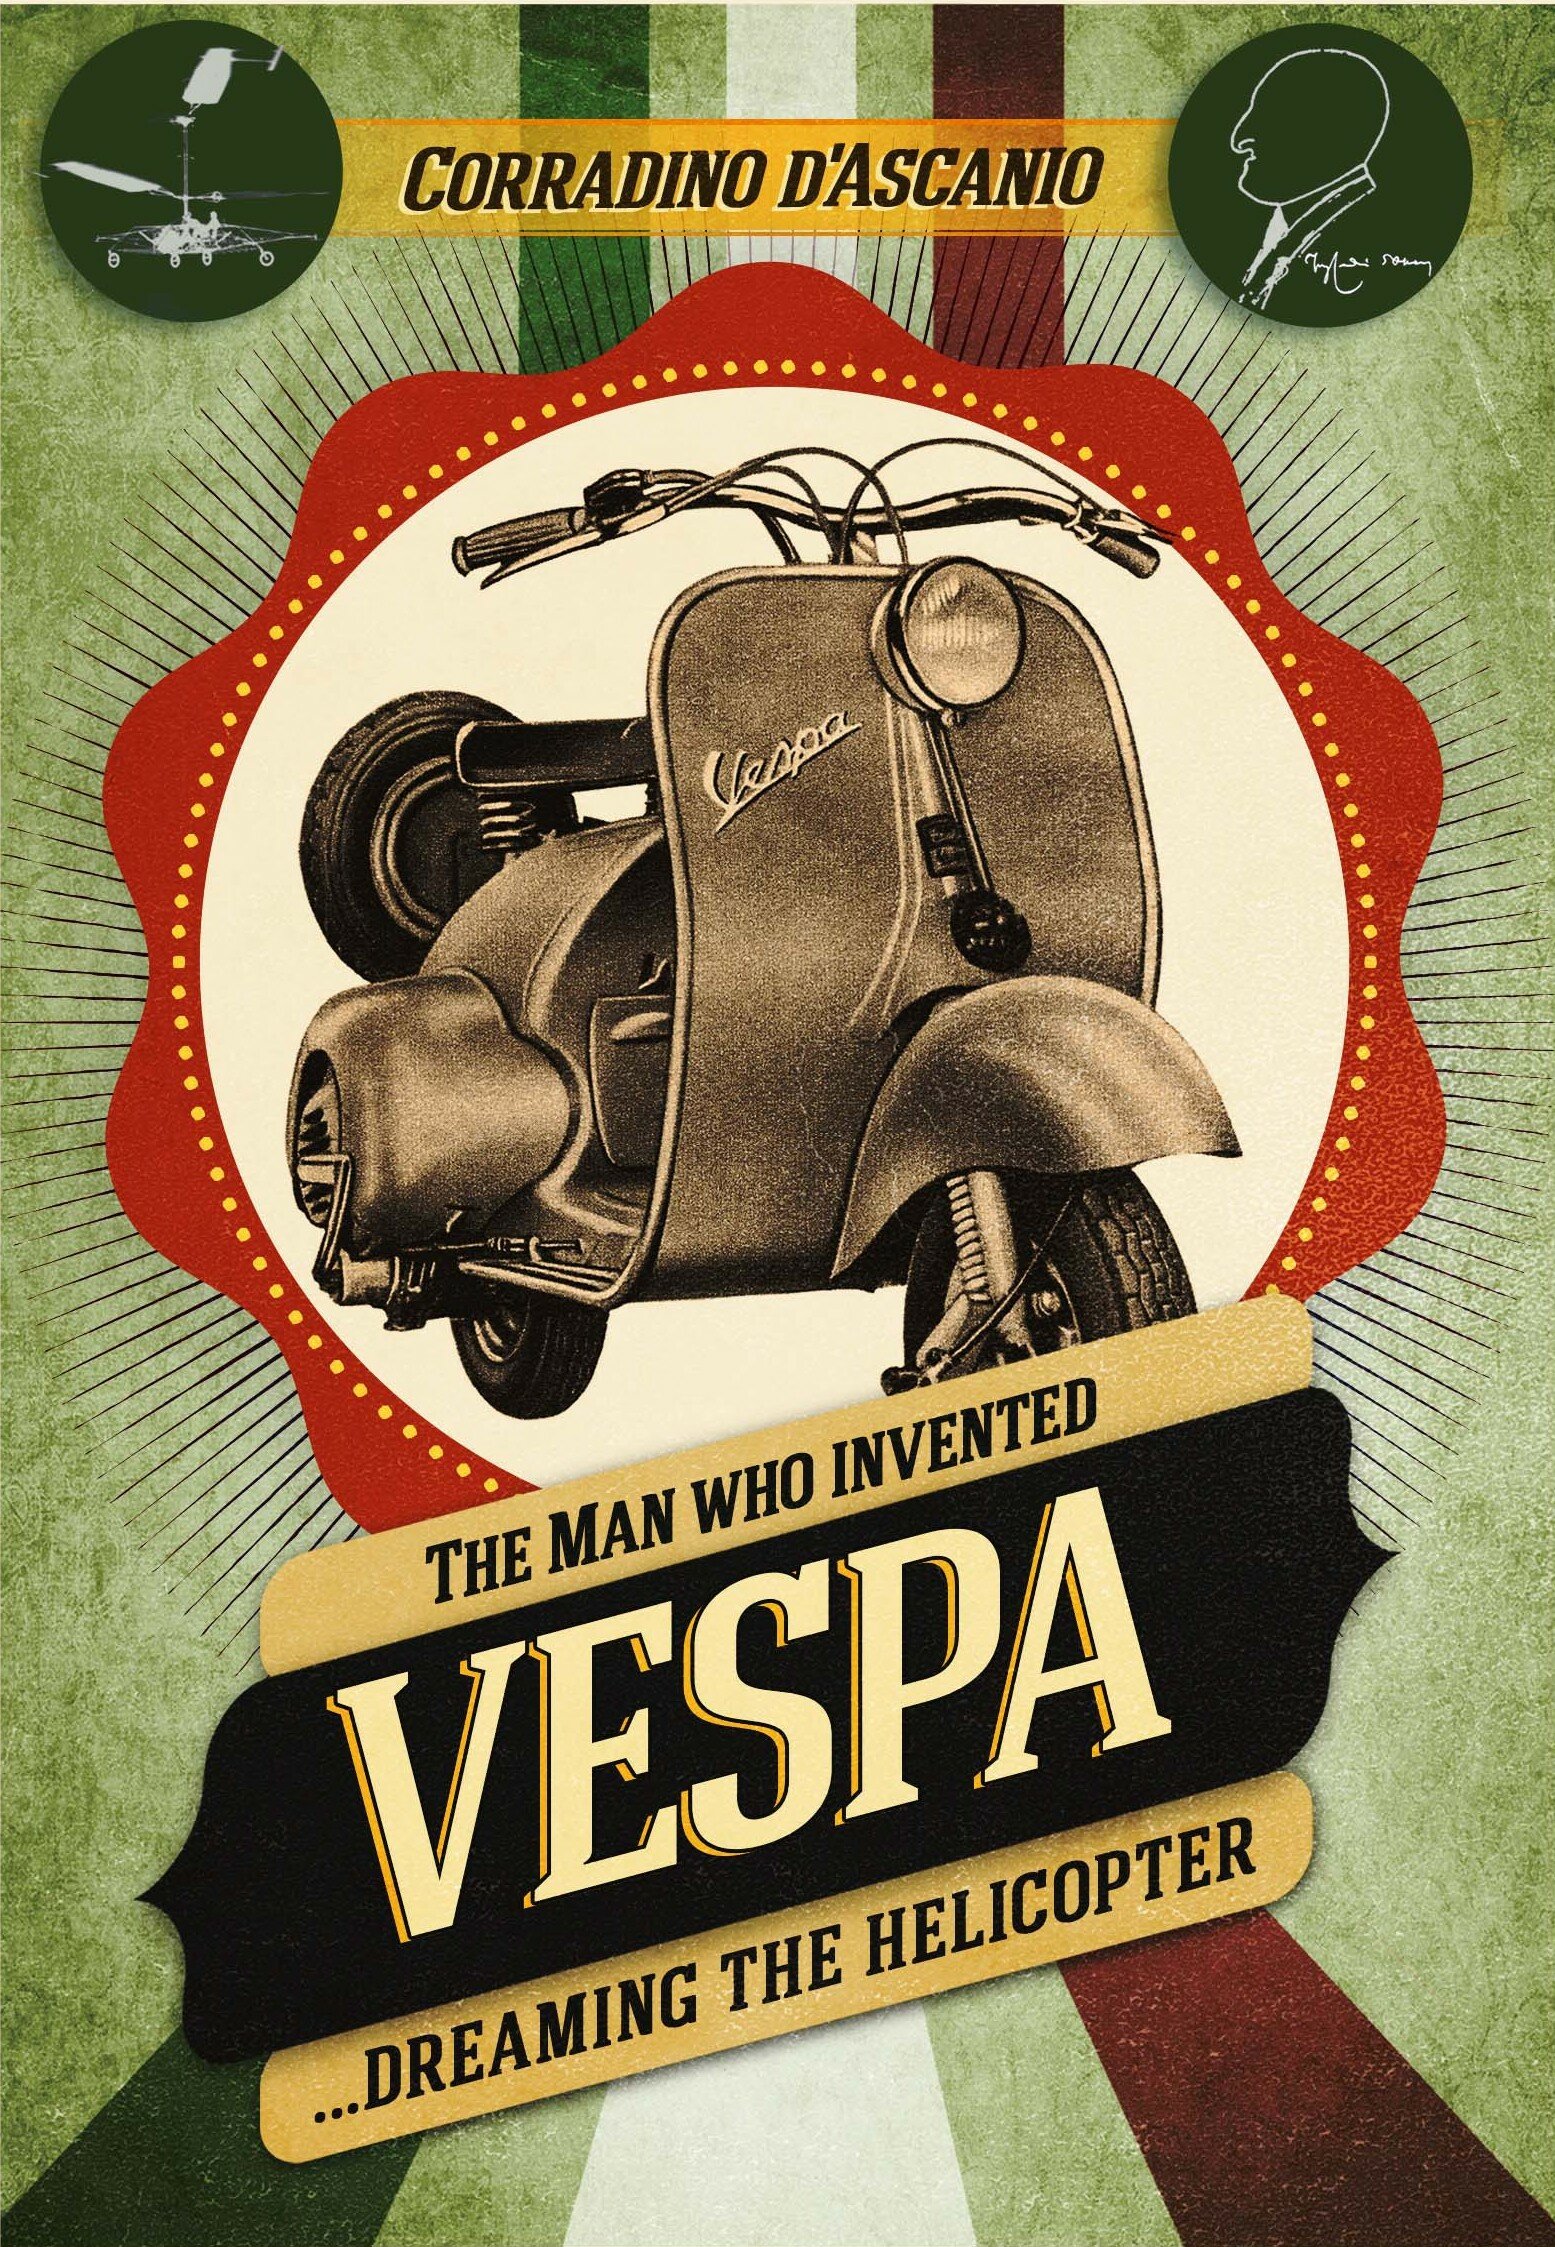 The Man Who Invented the Vespa 